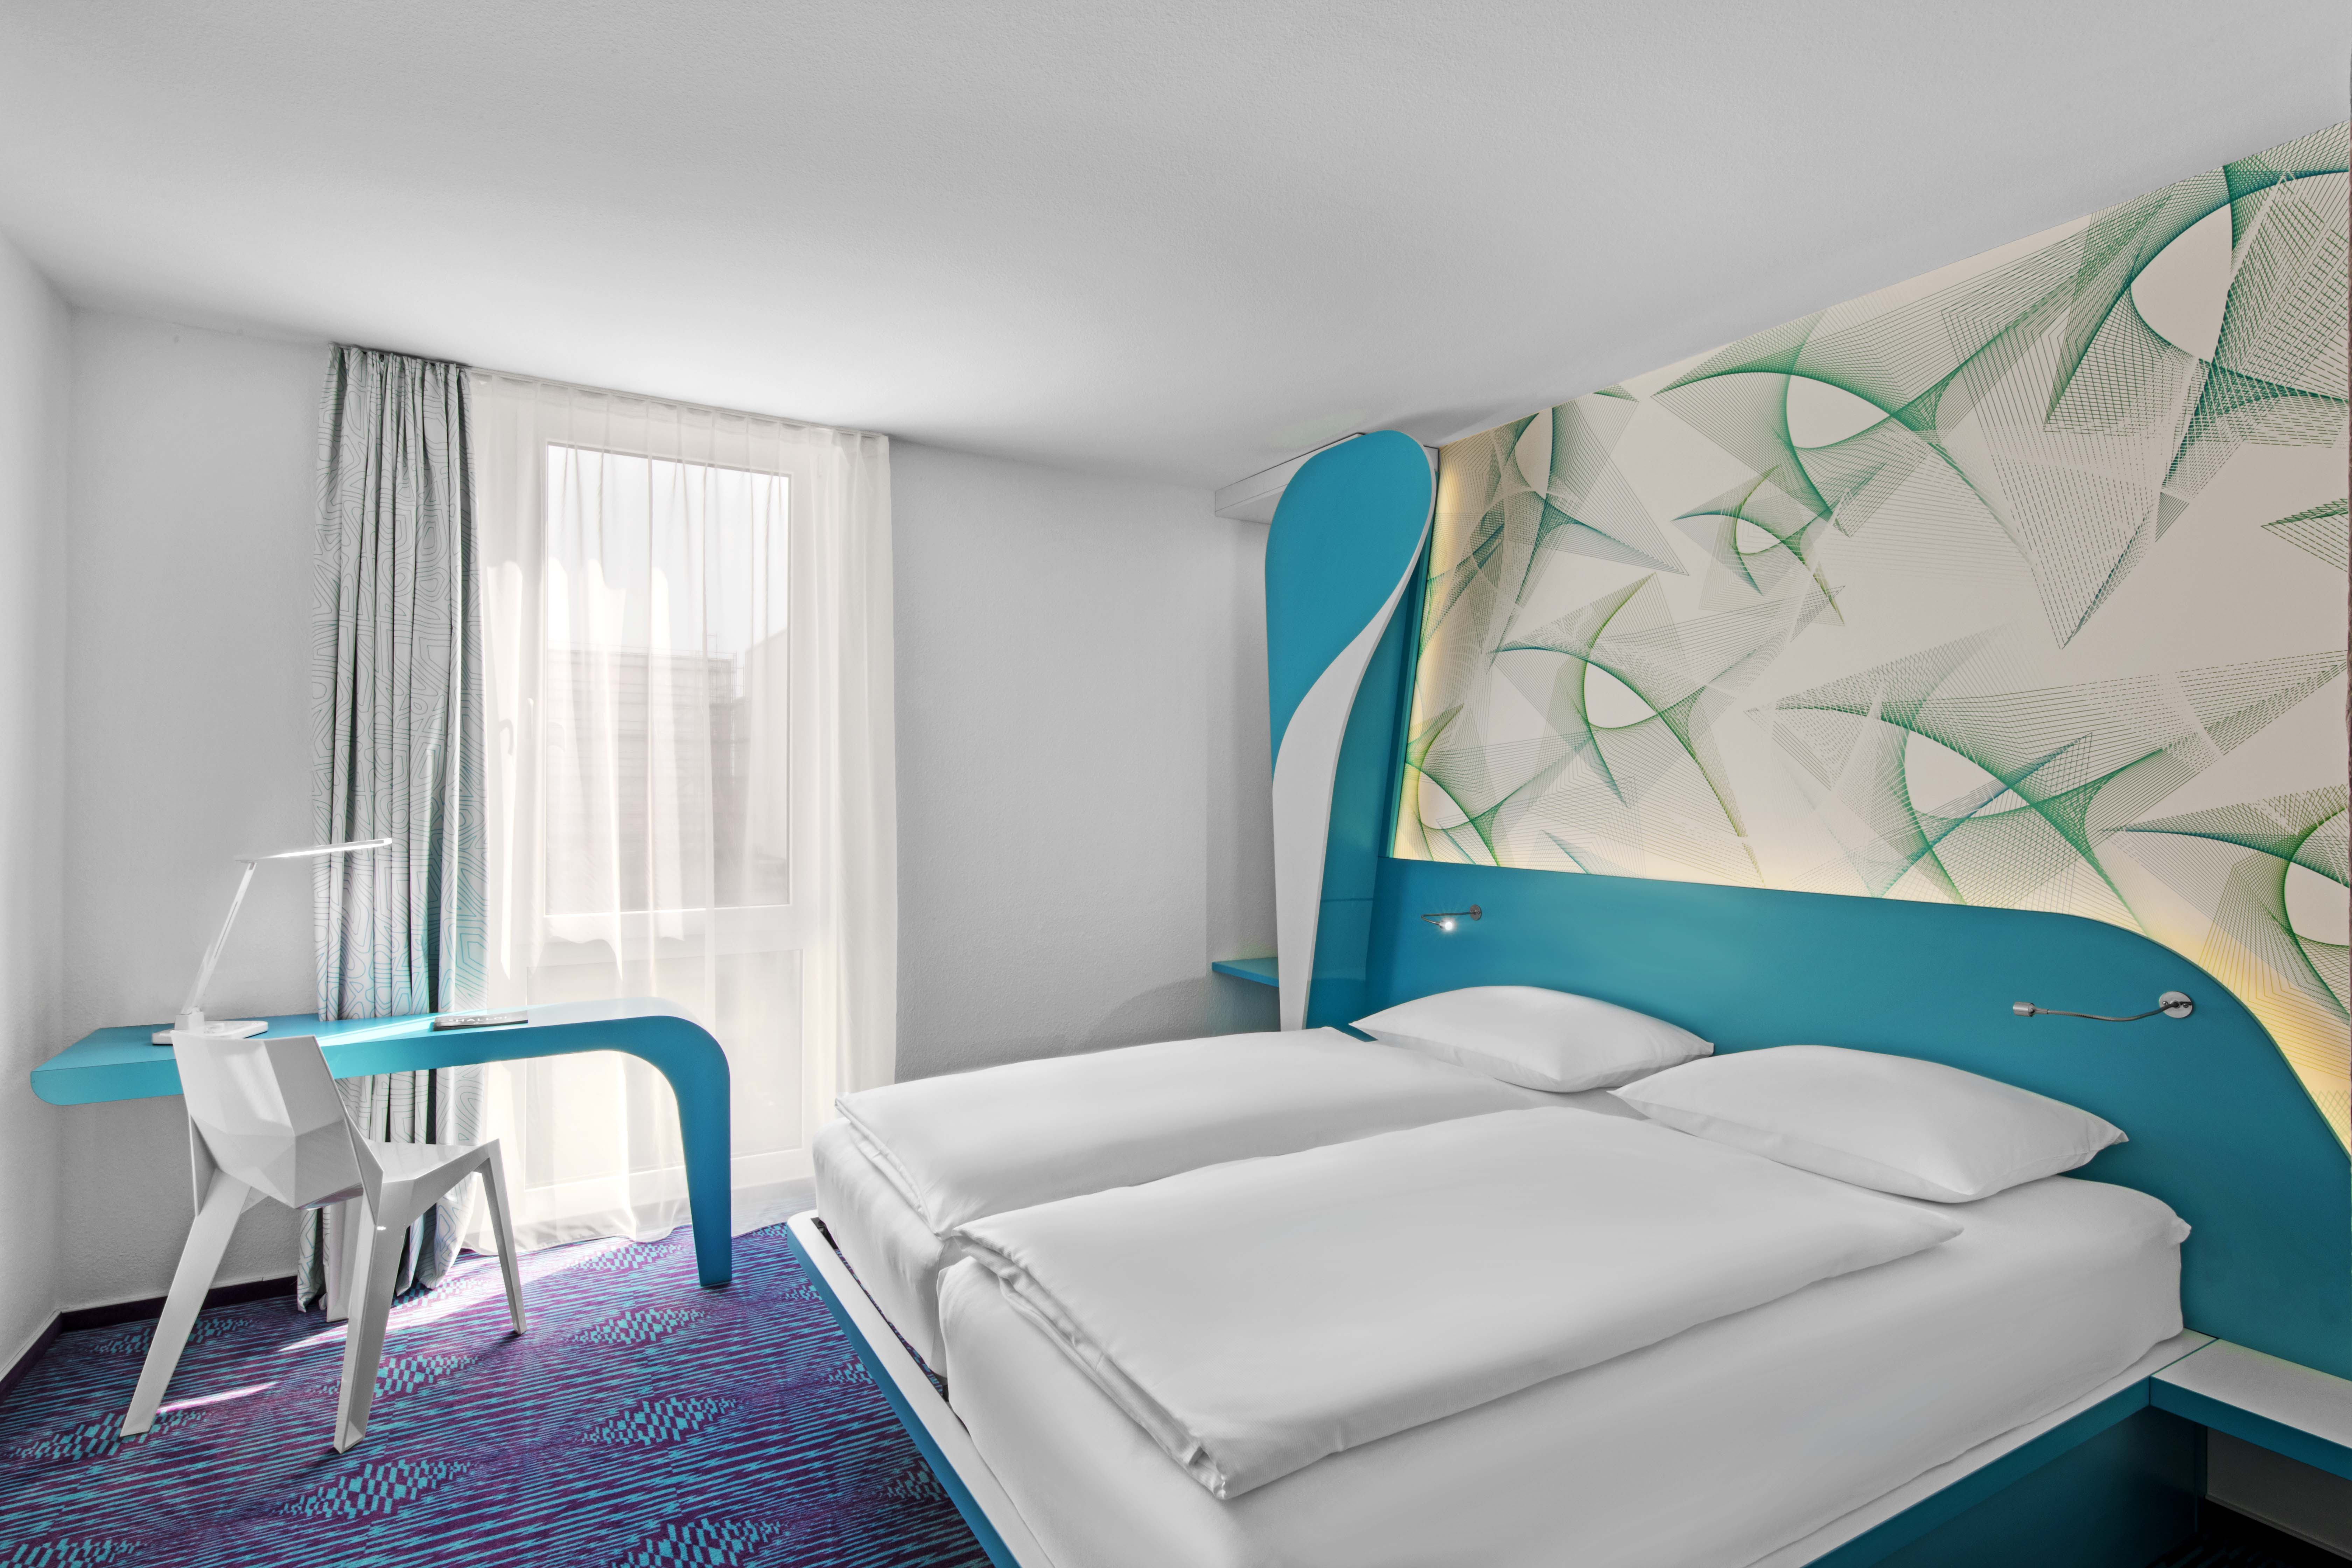 A modern double bedroom at prizeotel is pictured